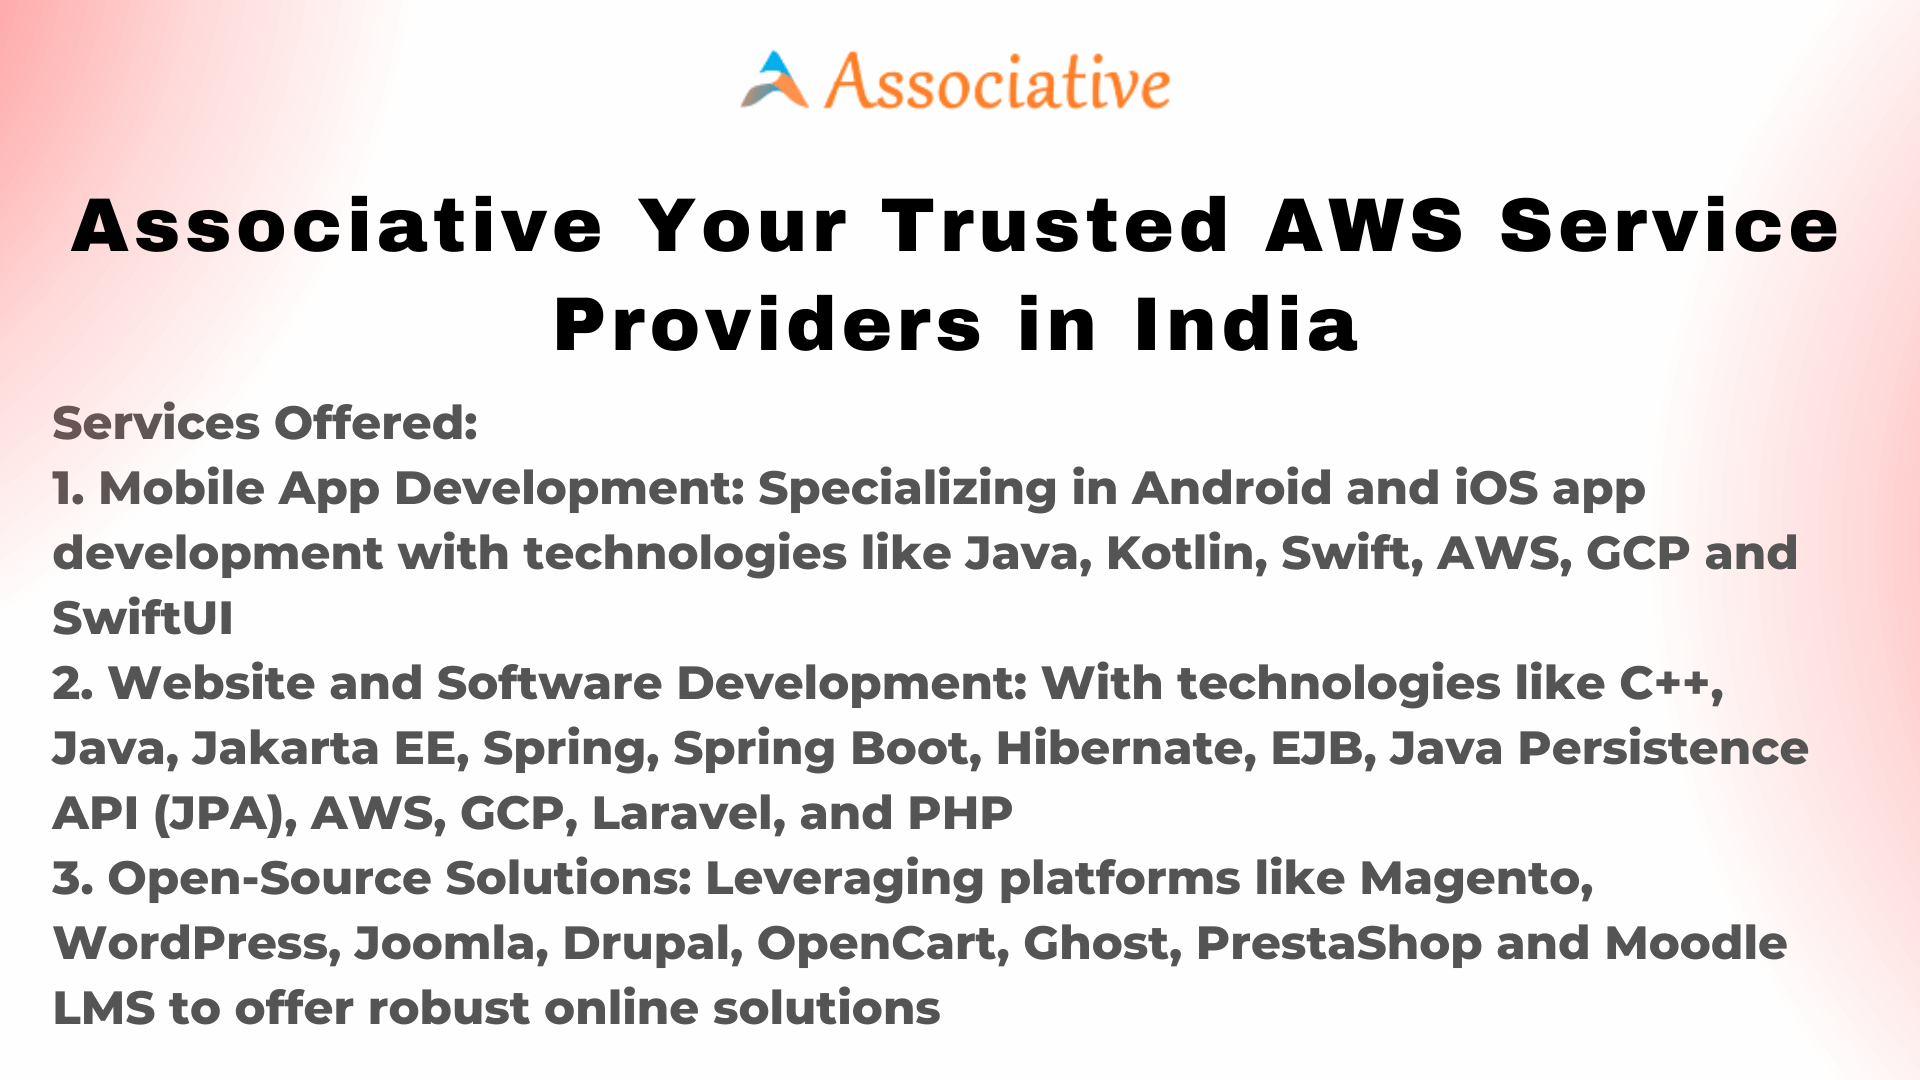 Associative Your Trusted AWS Service Providers in India